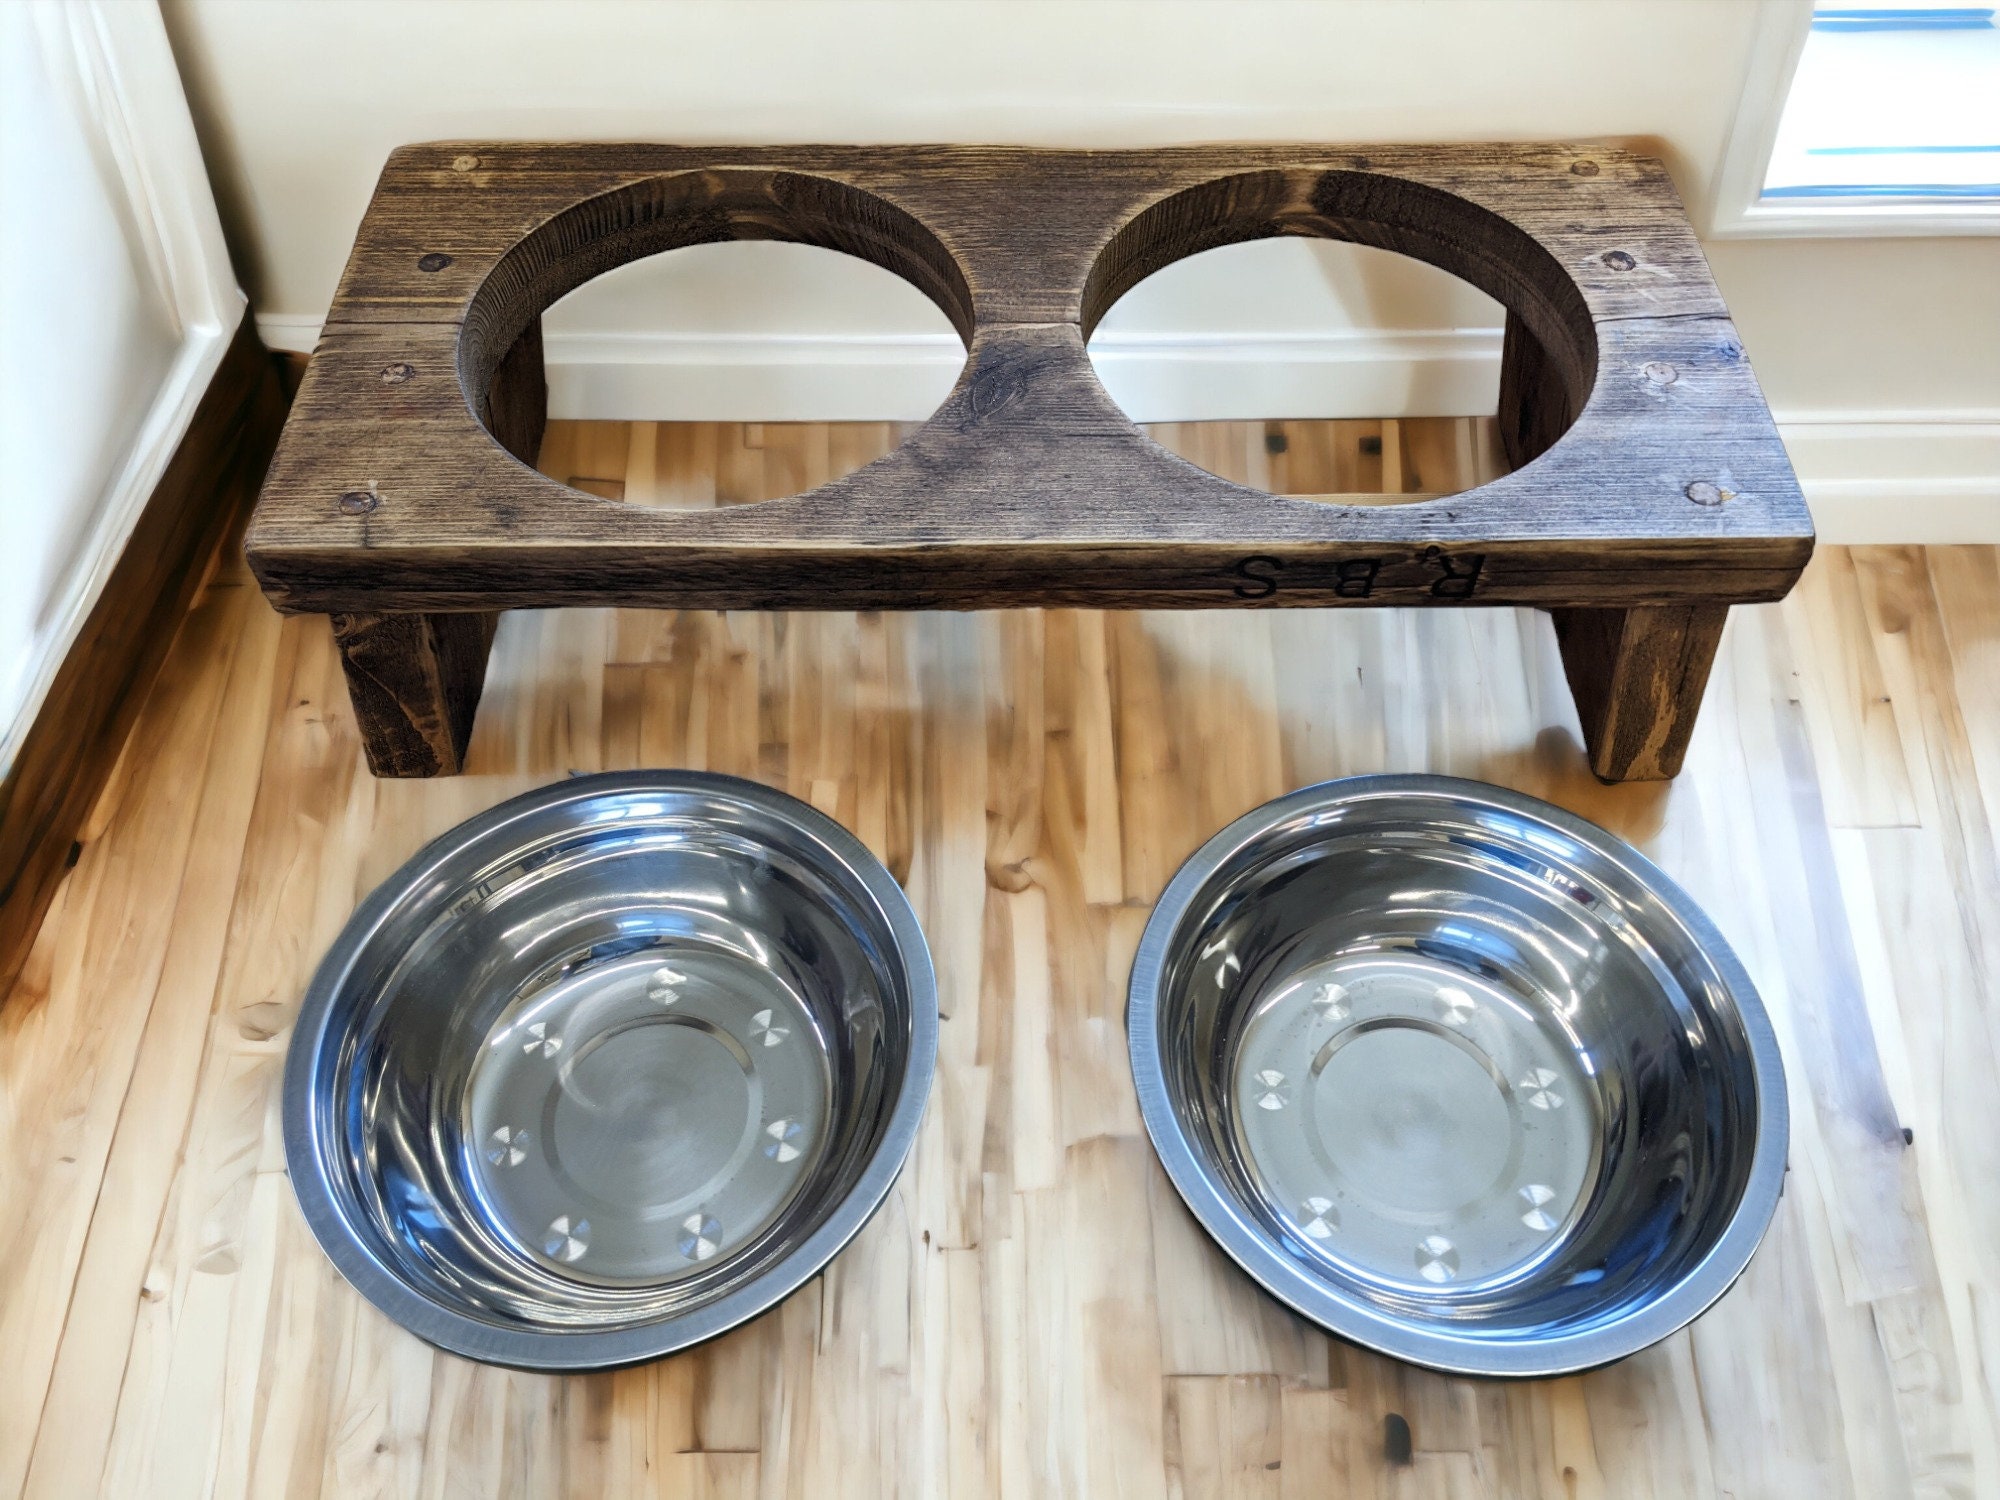 Single bowl reclaimed pallet dog bowl feeding stand – Rustic